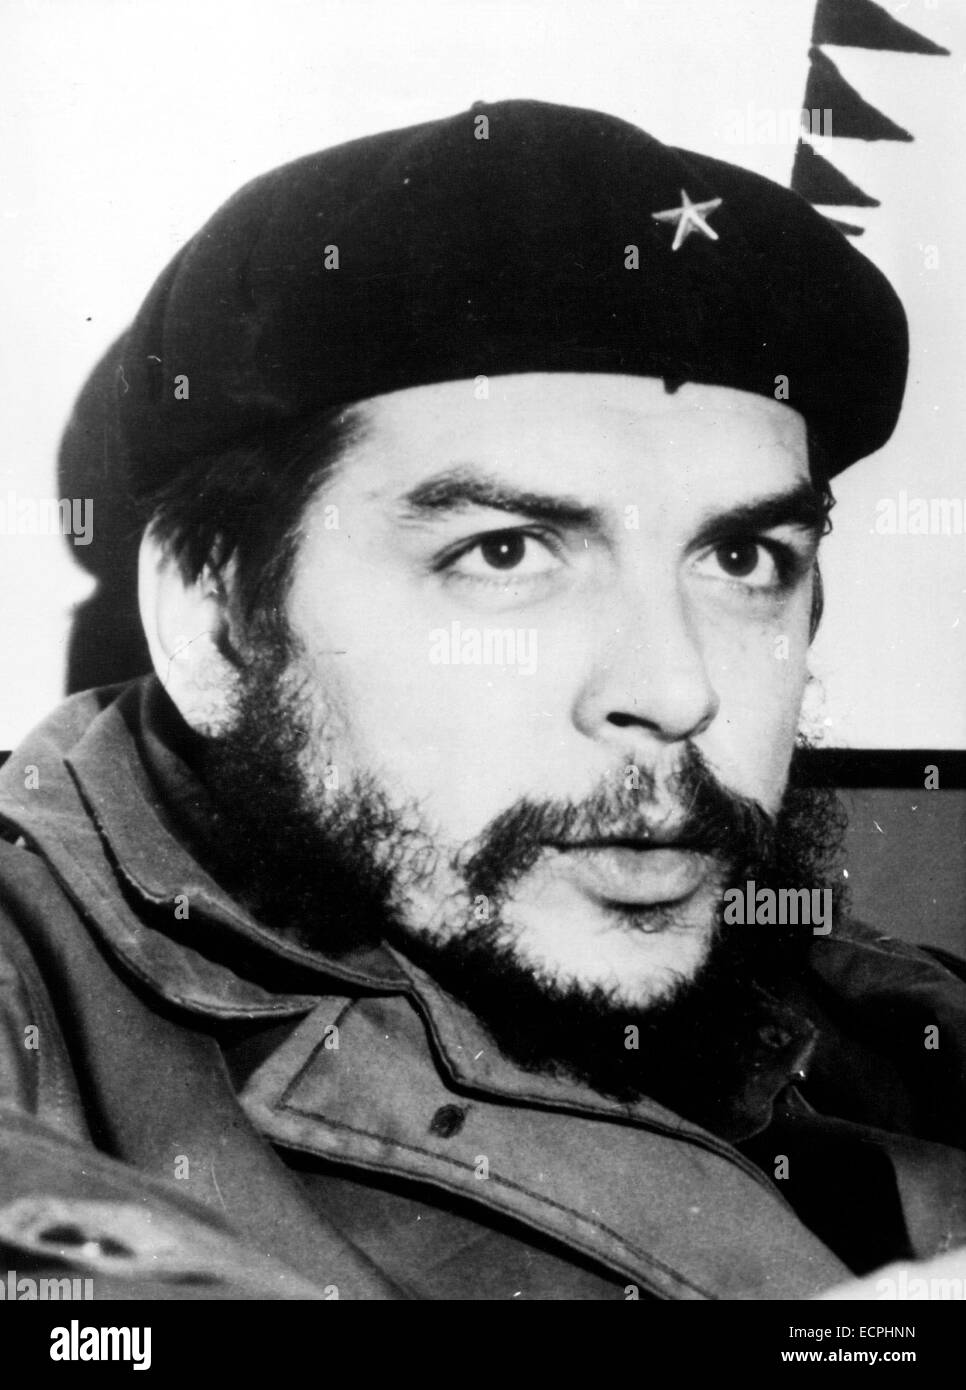 Punta del Este, Uruguay. 1st Jan, 1960. By the time ERNESTO GUEVARA, known to us as Che, was murdered in the jungles of Bolivia in October 1967, he was already a legend. In 1956, along with Fidel Castro and a handful of others, he had crossed the Caribbean in the rickety yacht Granma on the mission of invading Cuba. Over two years later, the insurgents entered Havana and launched what was to become the first and only victorious socialist revolution in the Americas. © KEYSTONE Pictures USA/ZUMAPRESS.com/Alamy Live News Stock Photo